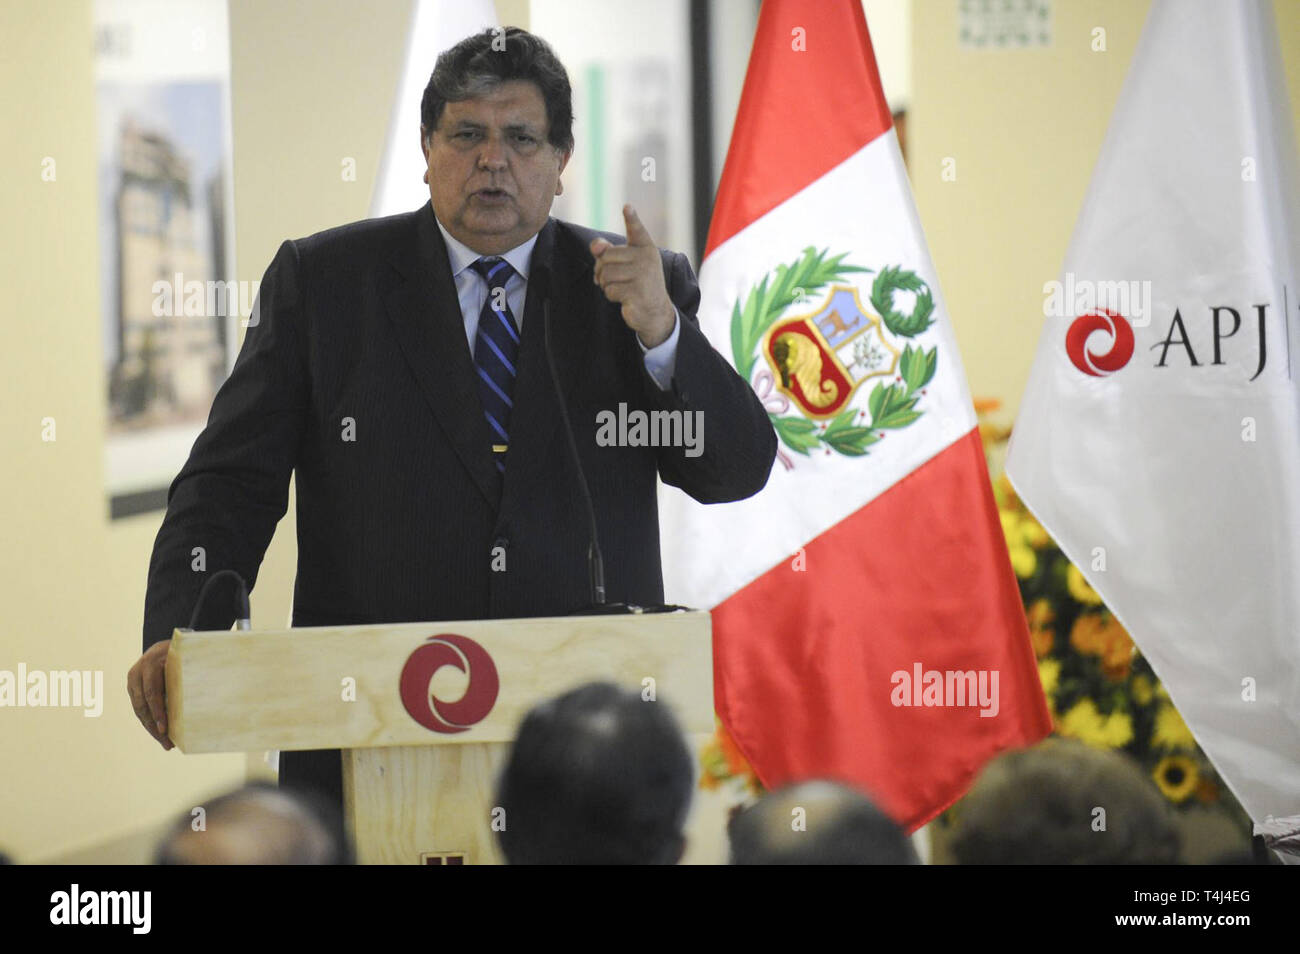 A picture dated June 14, 2011 shows Peruvian President Alan Garcia speaking during the inauguration of the construction of the third stage of Peruvian-Japanese Centennial clinic in Pueblo Libre, Peru. Human rights lawyers confirmed on June 14, 2011 that President Alan Garcia has the apparent intention to pardon former President Alberto Fujimori wo was sentenced to 25 years in prison for crimes against humanity, despite the denials made by the chief of staff, Rosario Fernandez. Photo: Oscar Durand/Andina/dpa/Handout | usage worldwide Stock Photo